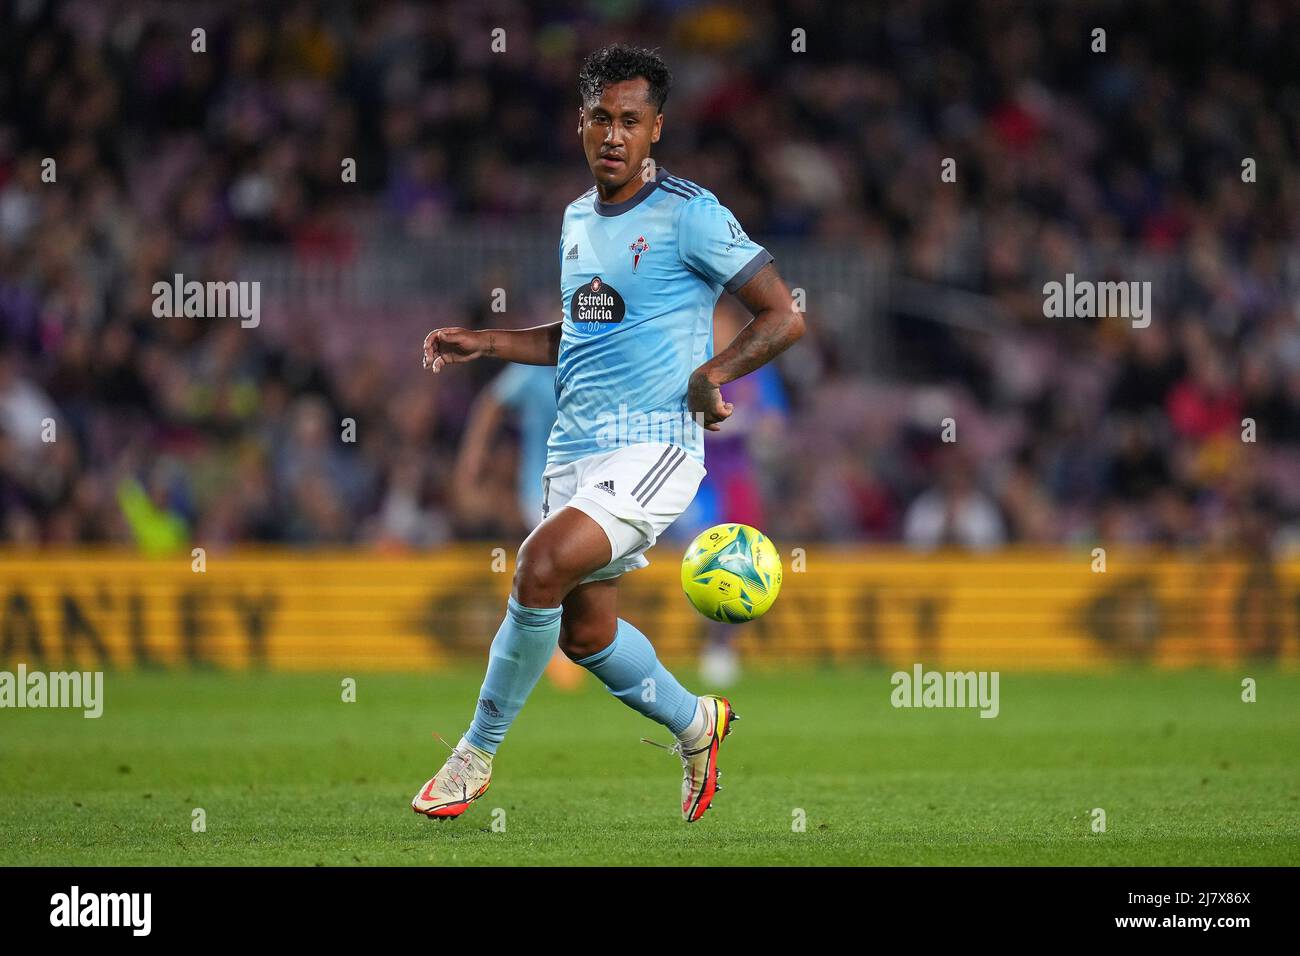 Barcelona, Spain, May 10, 2022, Renato Tapia of RC Celta during the La Liga match between FC Barcelona and RC Celta played at Camp Nou Stadium on May 10, 2022 in Barcelona, Spain. (Photo by Sergio Ruiz / PRESSINPHOTO) Stock Photo